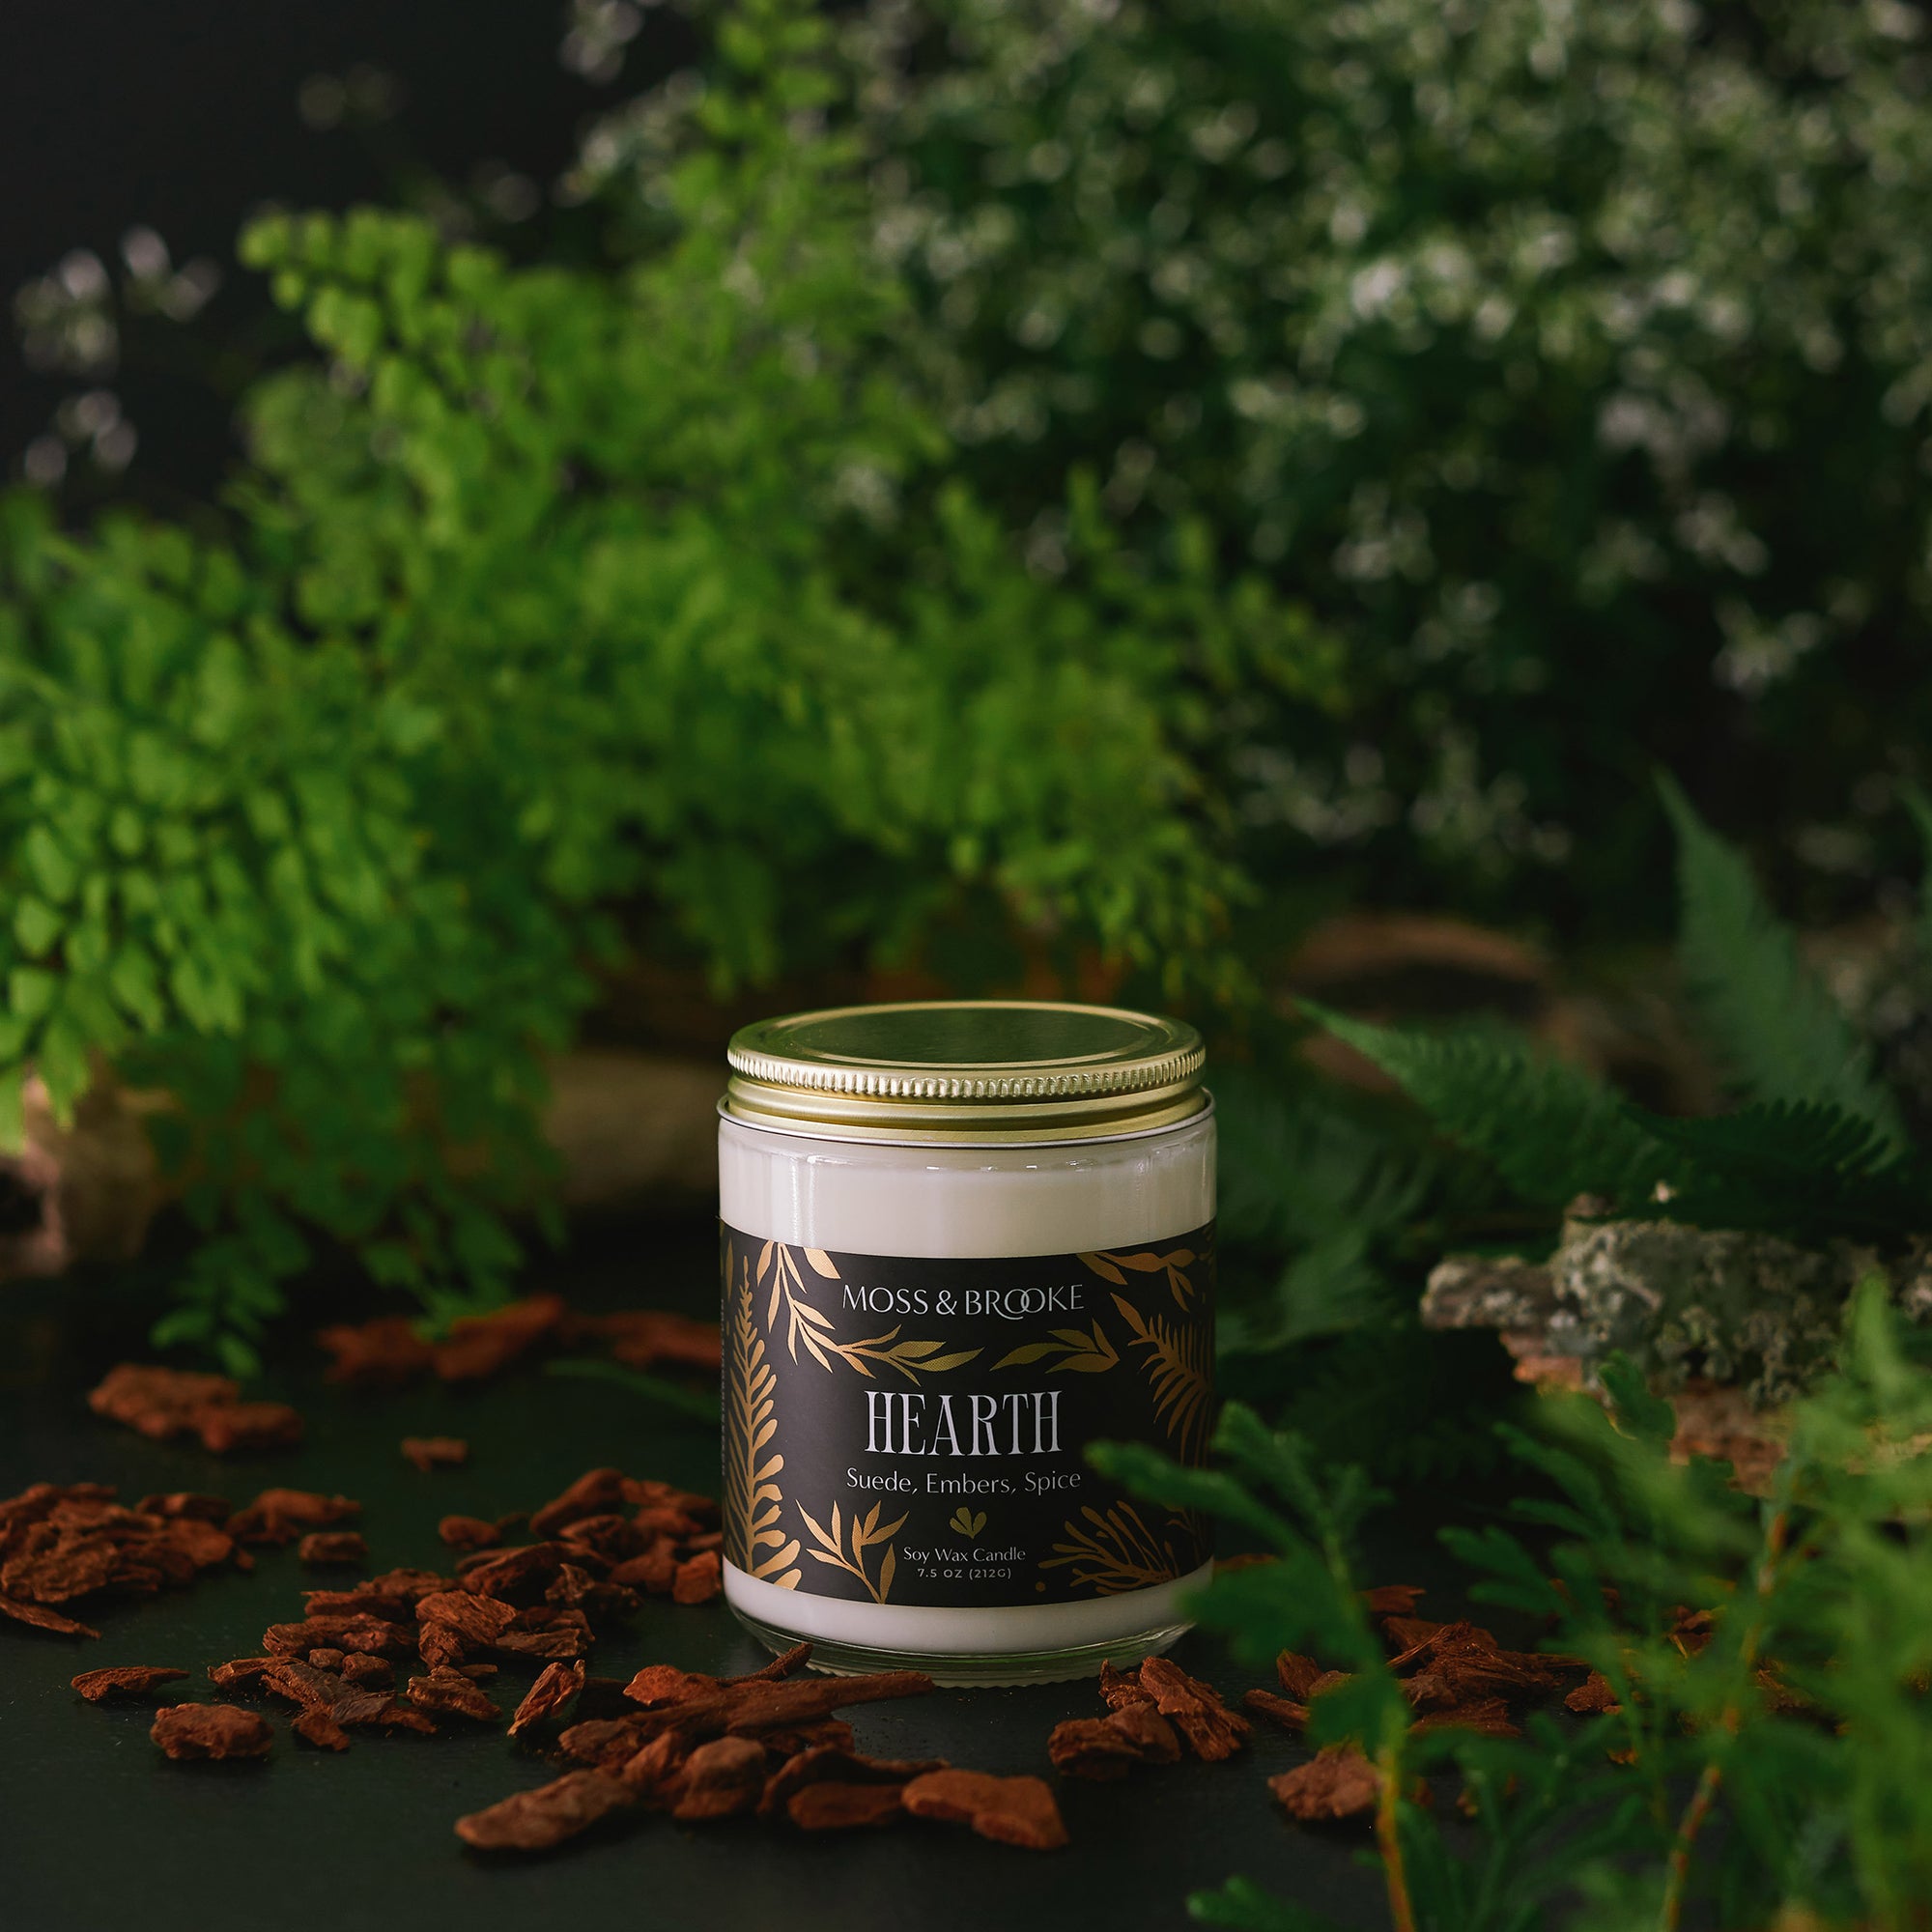 Clear glass candle jar with gold lid and black label with metallic gold illustrations of leaves and ferns. Photo background with leaves, flowers and ferns. Hearth candle scented with notes of suede, smoky embers, cinnamon and spice.